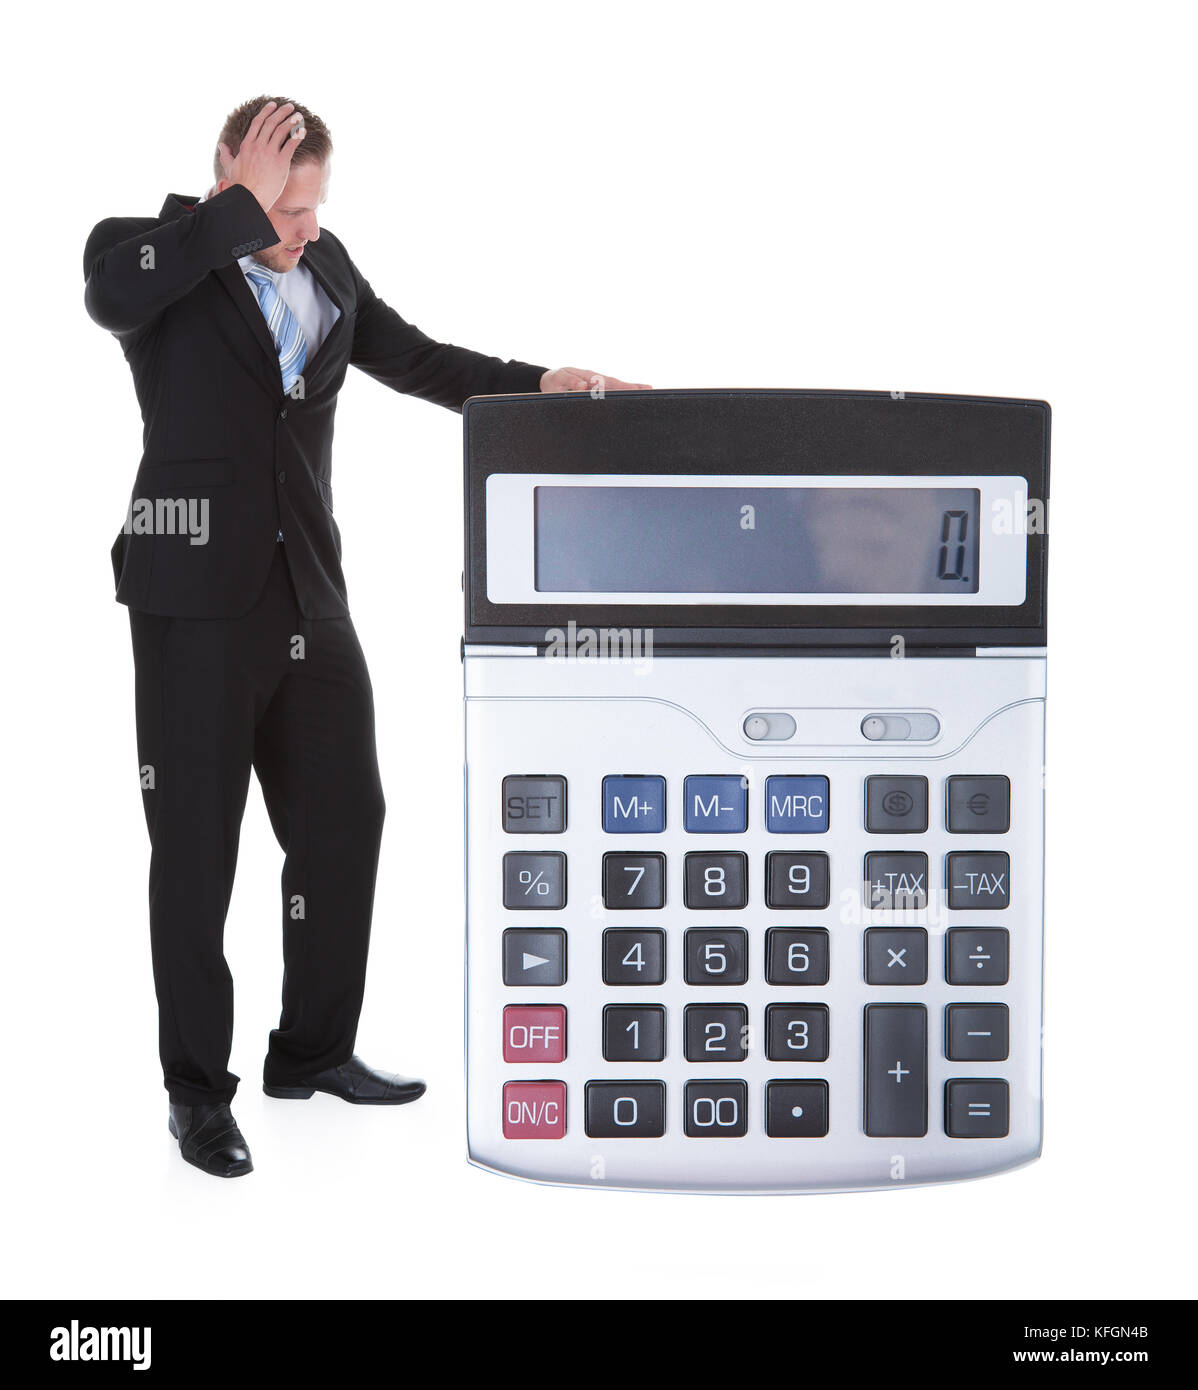 Large calculator Cut Out Stock Images & Pictures - Alamy